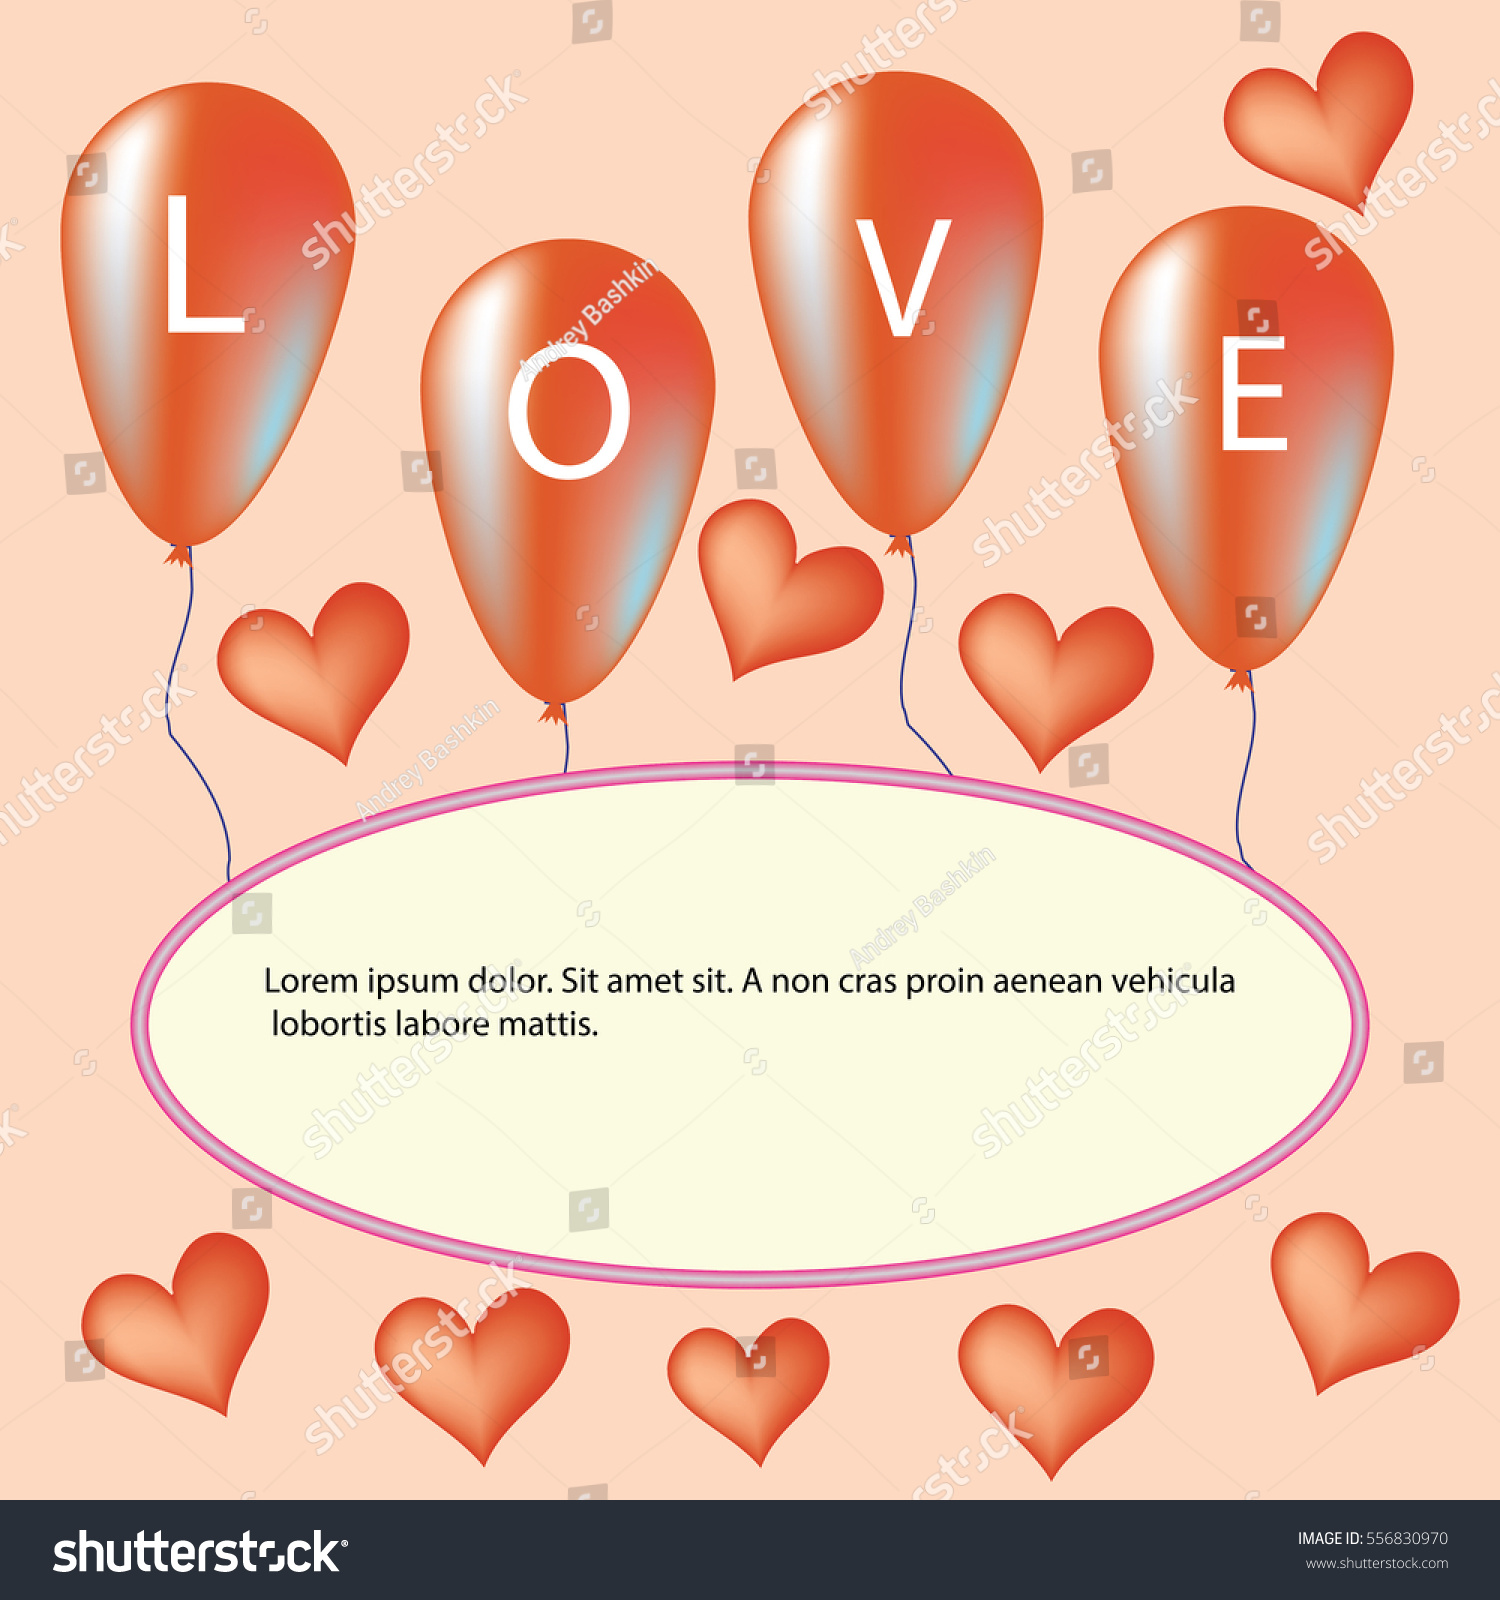 Love You Valentine's Day Greeting card, vector illustration #556830970